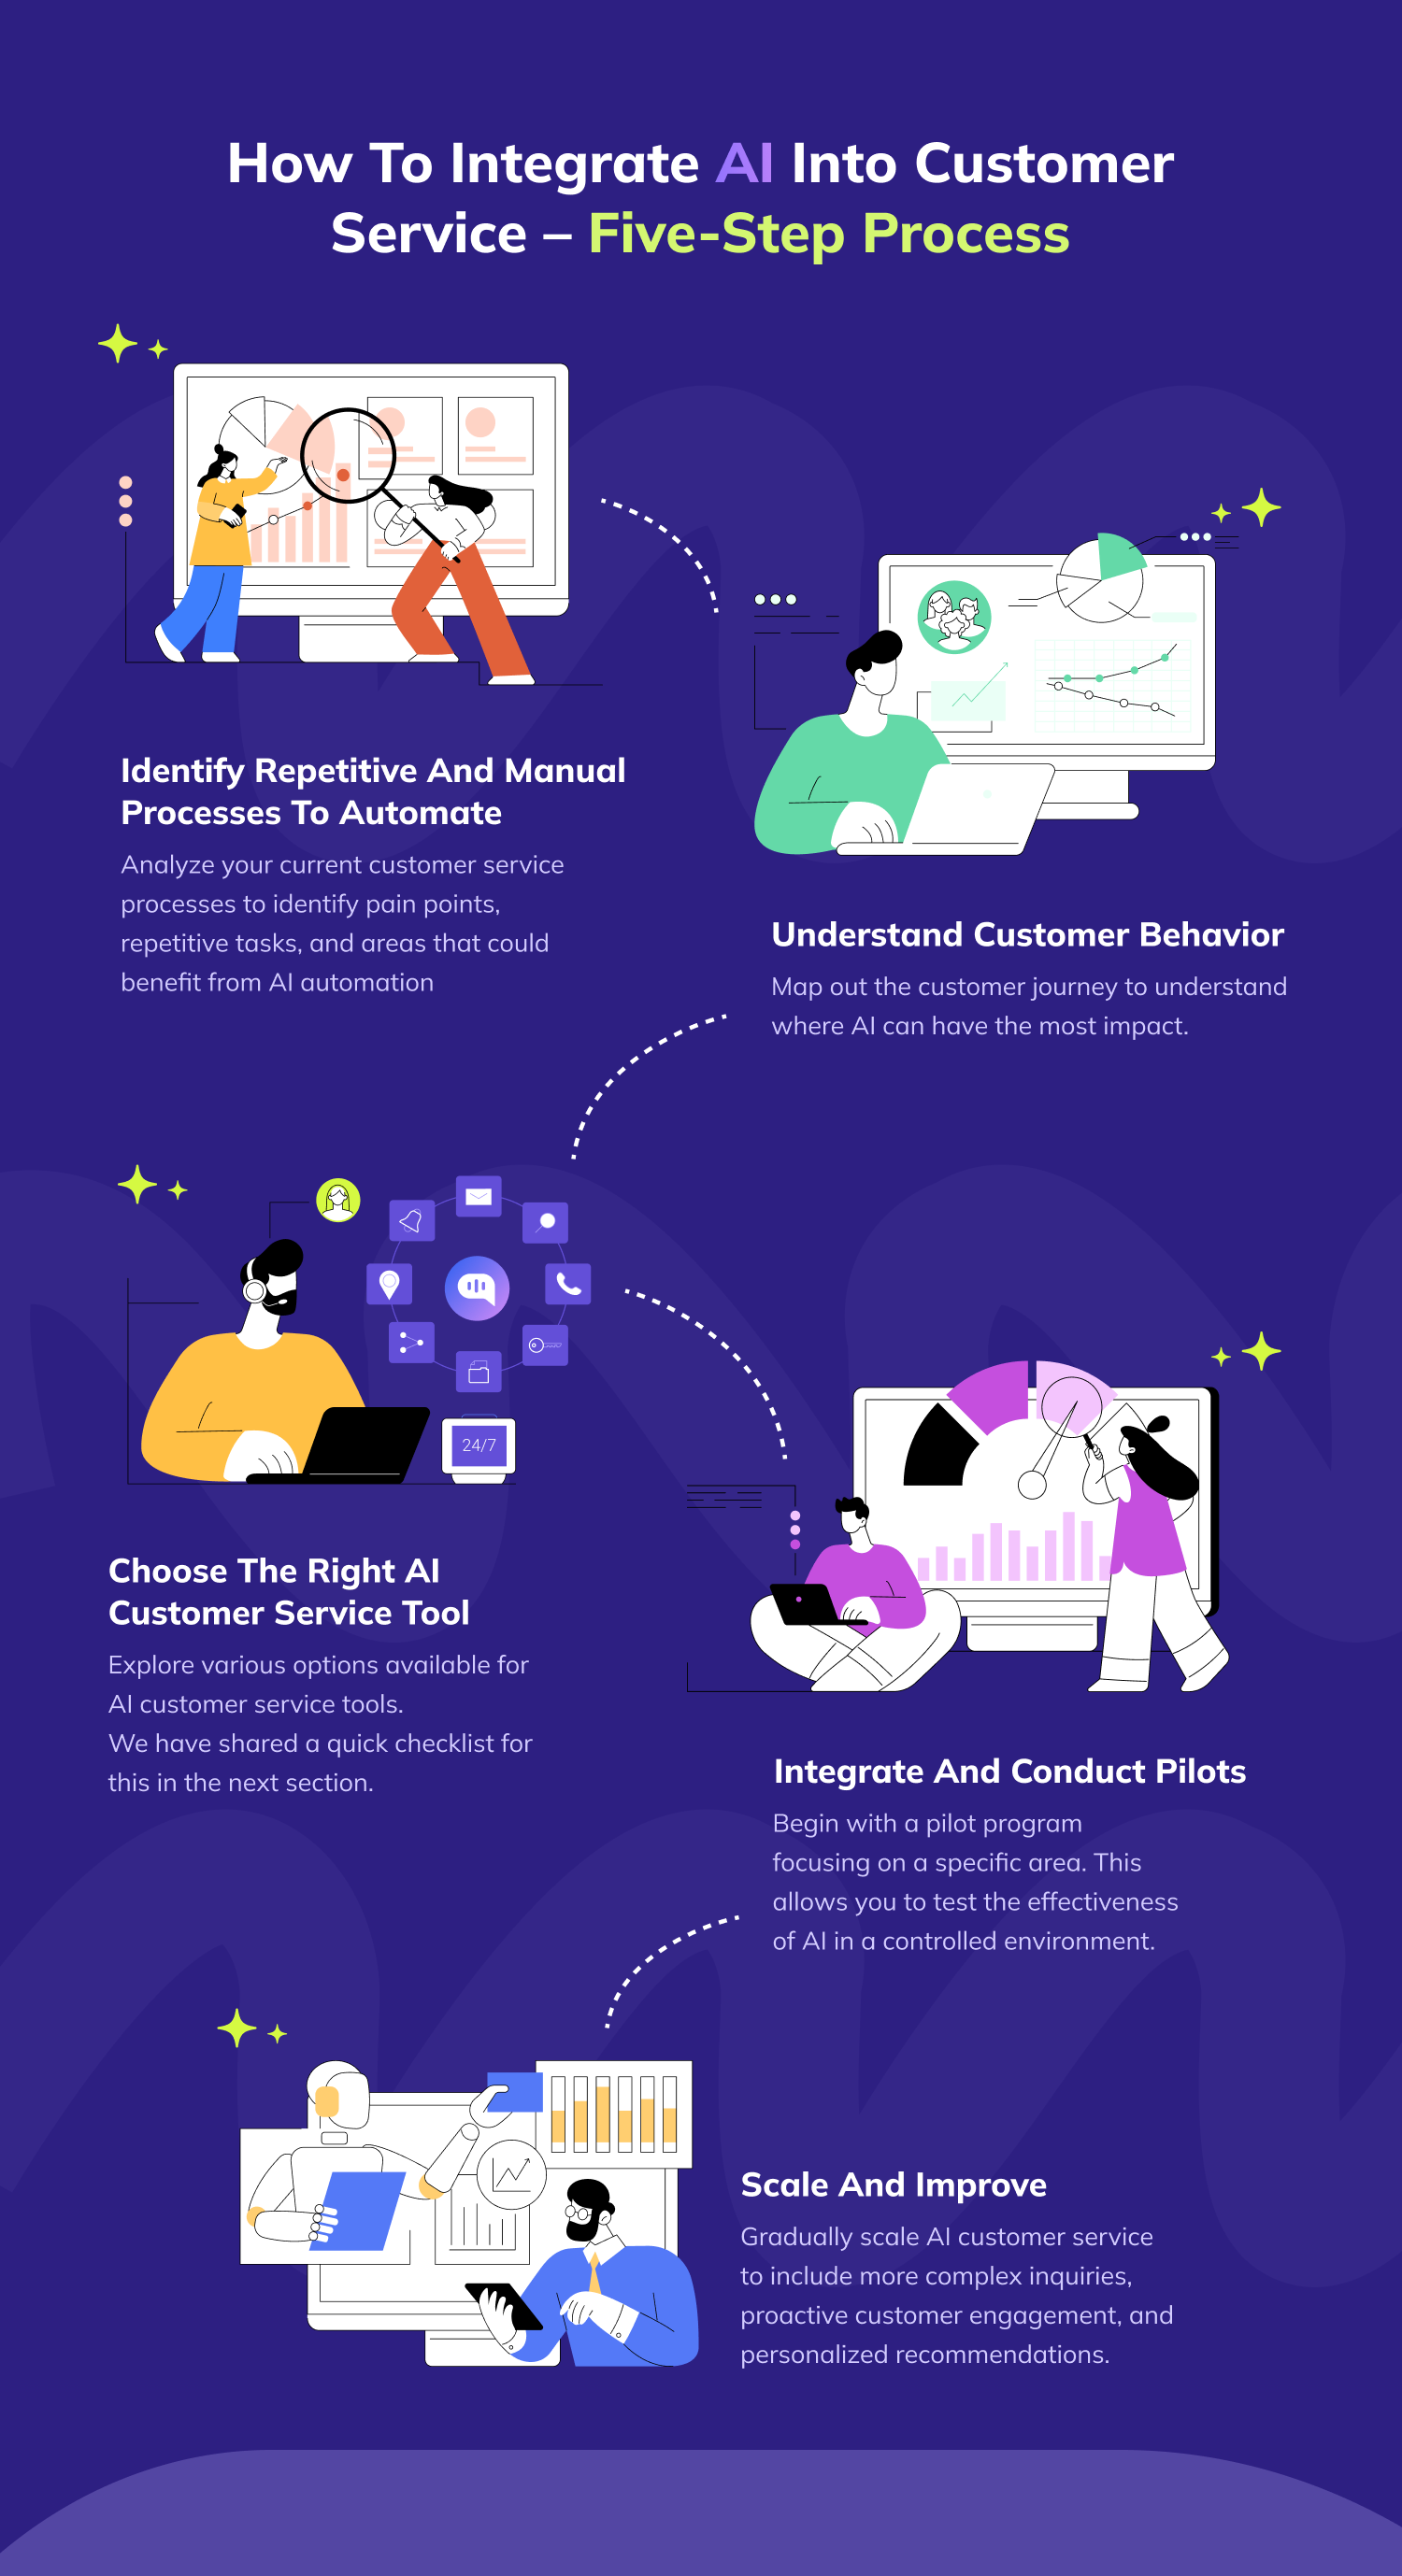 Detailed infographic illustrating a five-step process for integrating AI into customer service. Steps include: 1) Identify repetitive processes to automate, 2) Understand customer behavior, 3) Choose the right AI customer service tool, 4) Integrate and conduct pilots, and 5) Scale and improve. Each step is accompanied by explanatory text and illustrated with cartoon-style graphics of people working with computers and data.